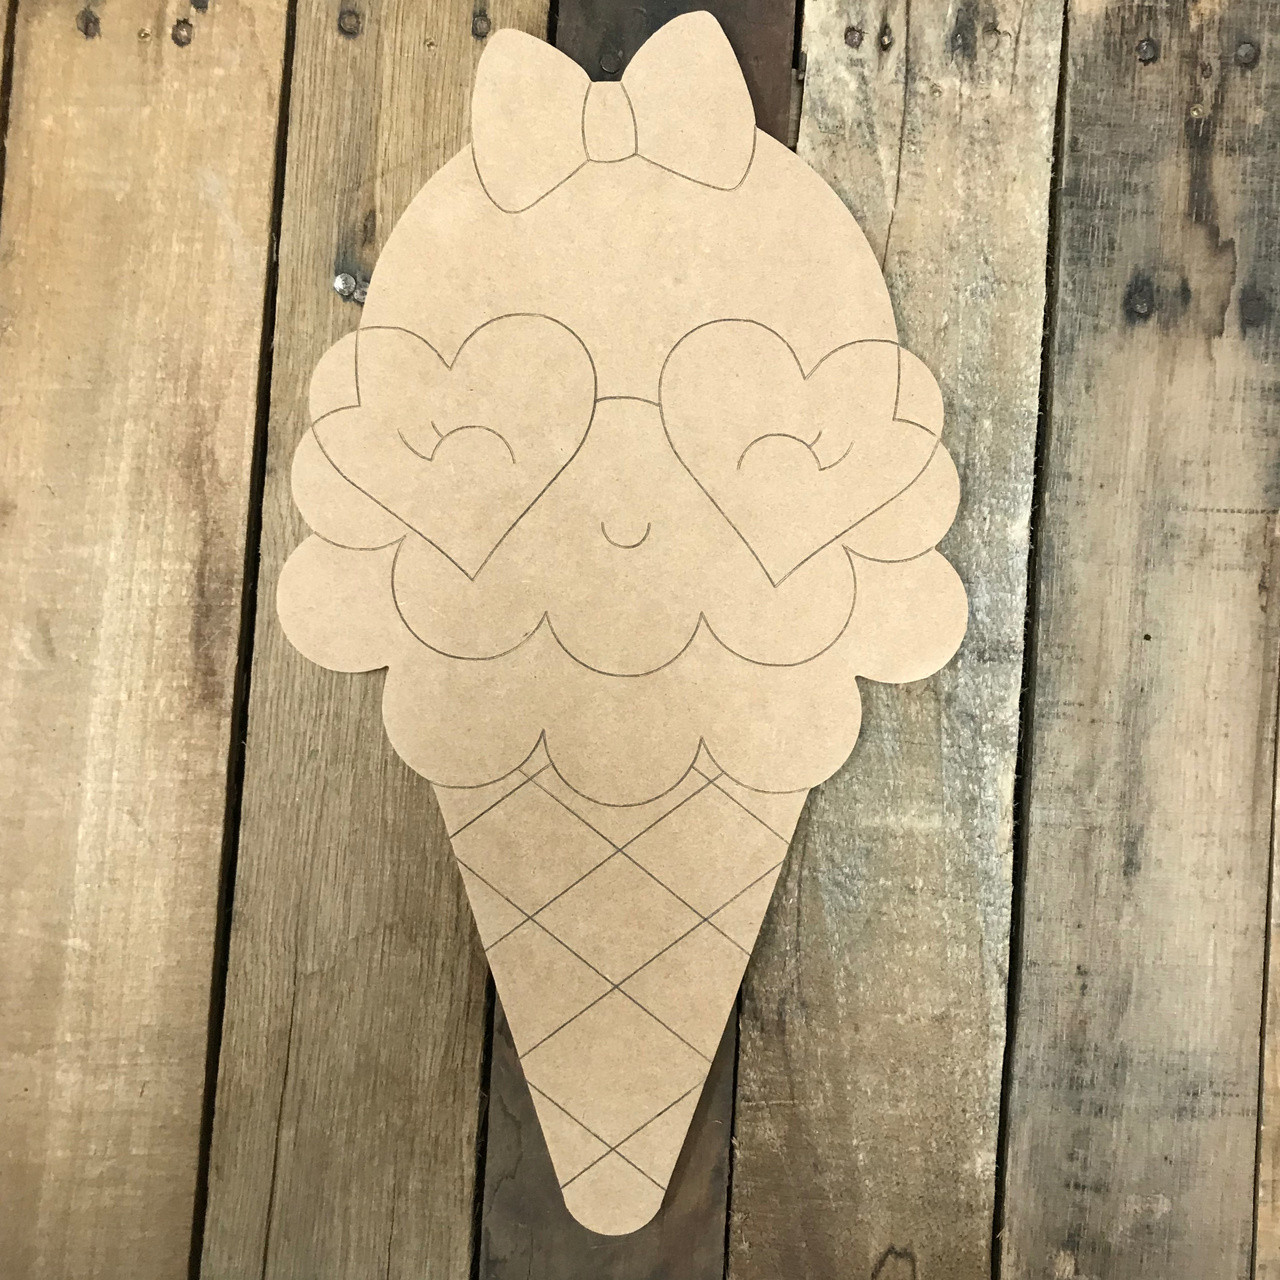 Unfinished Wooden Hand Print Cutout